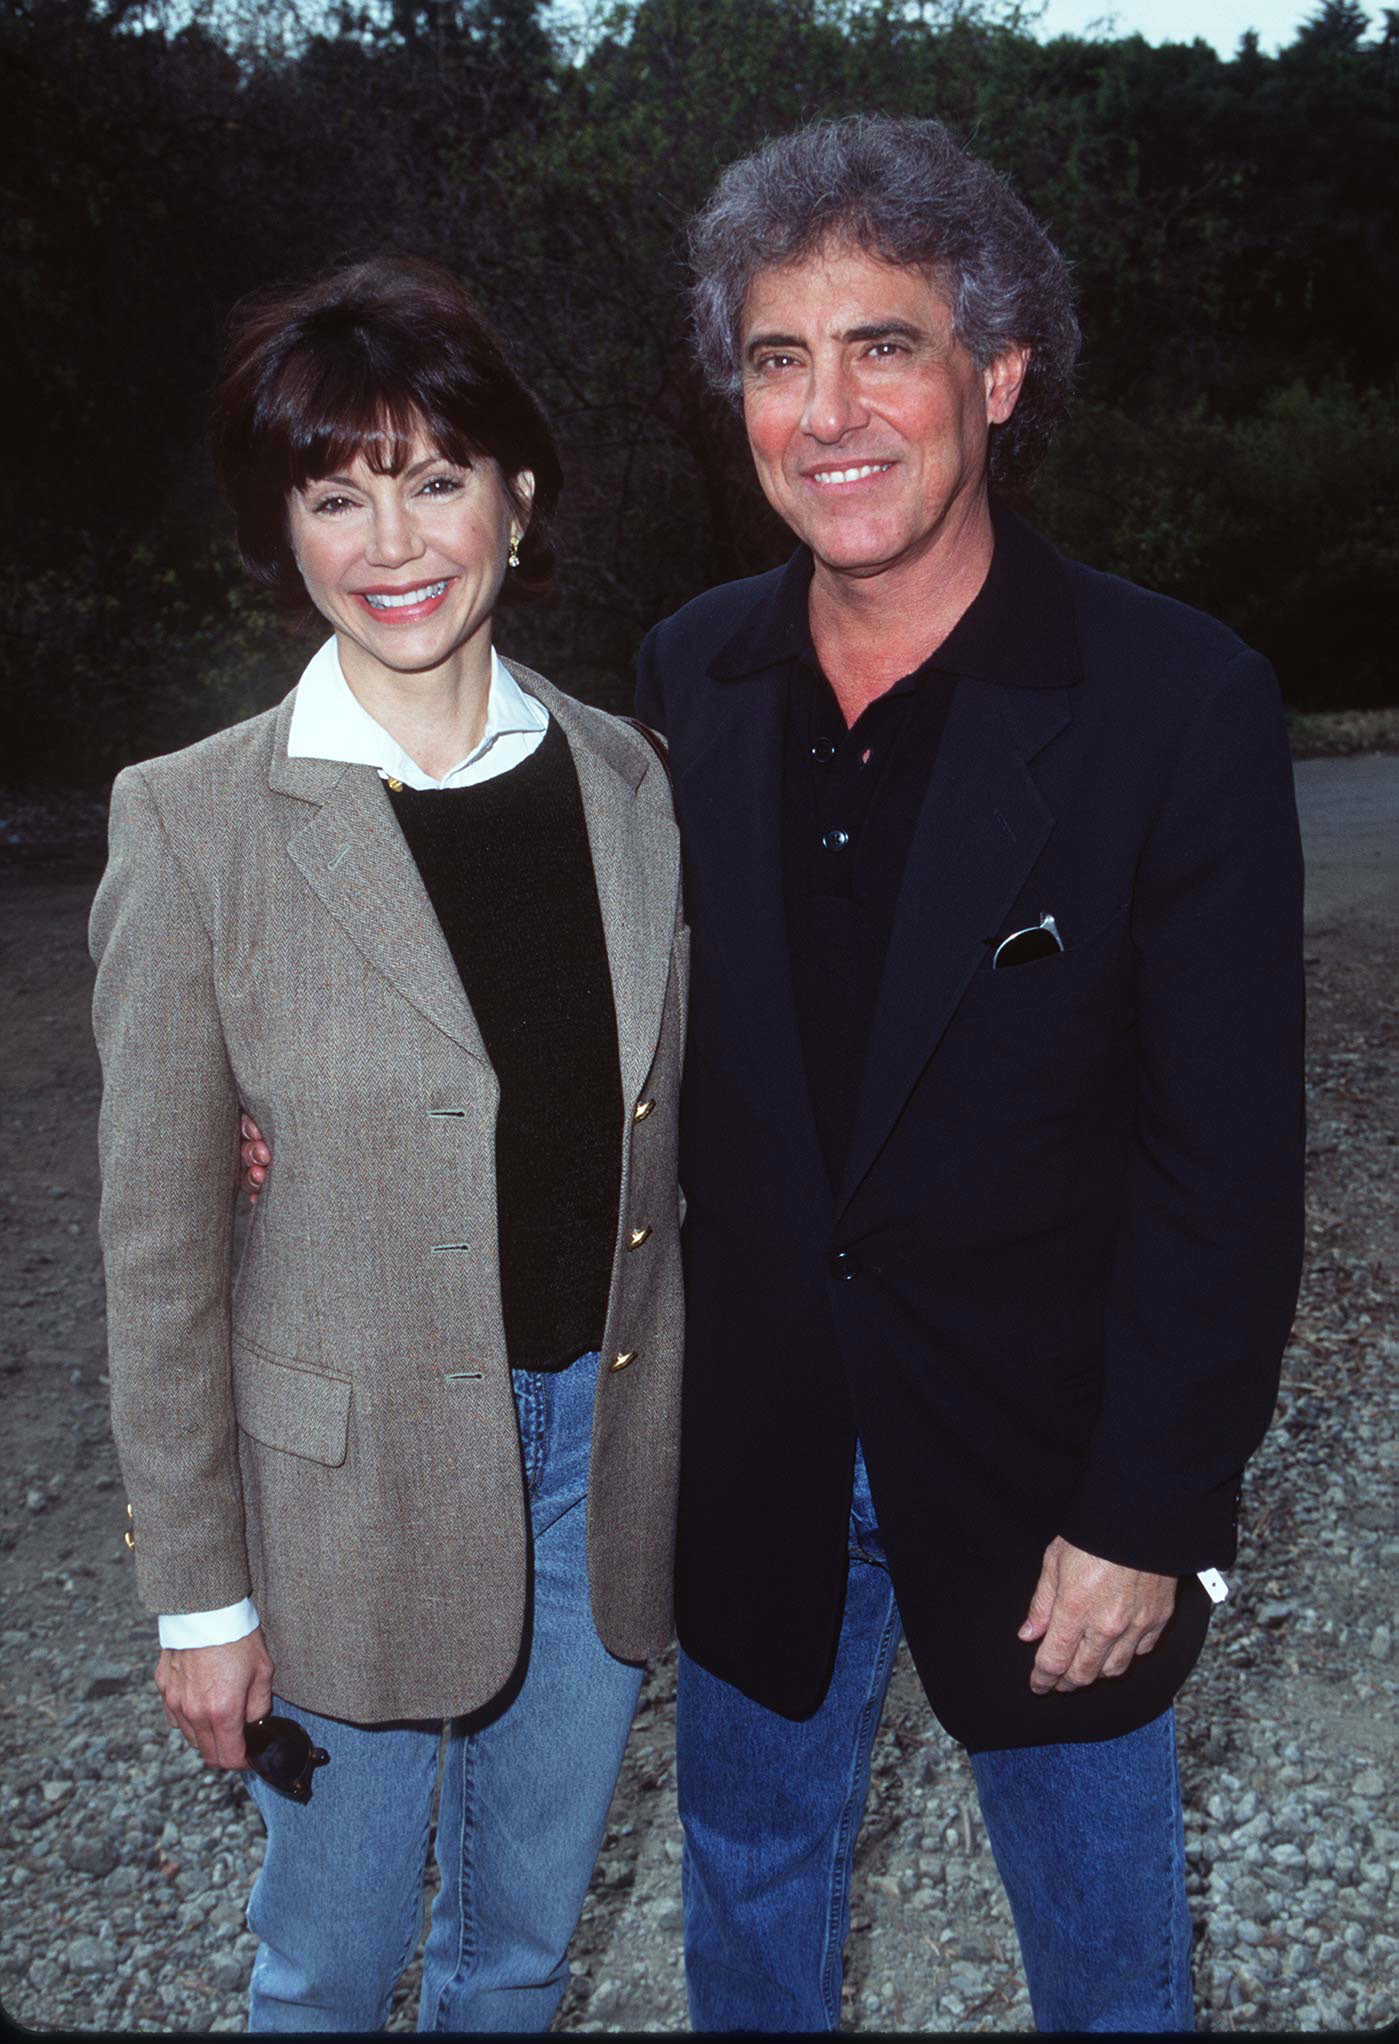 Victoria Principal and Harry Glassman in Los Angeles, California on November 17, 1996 | Source: Getty Images